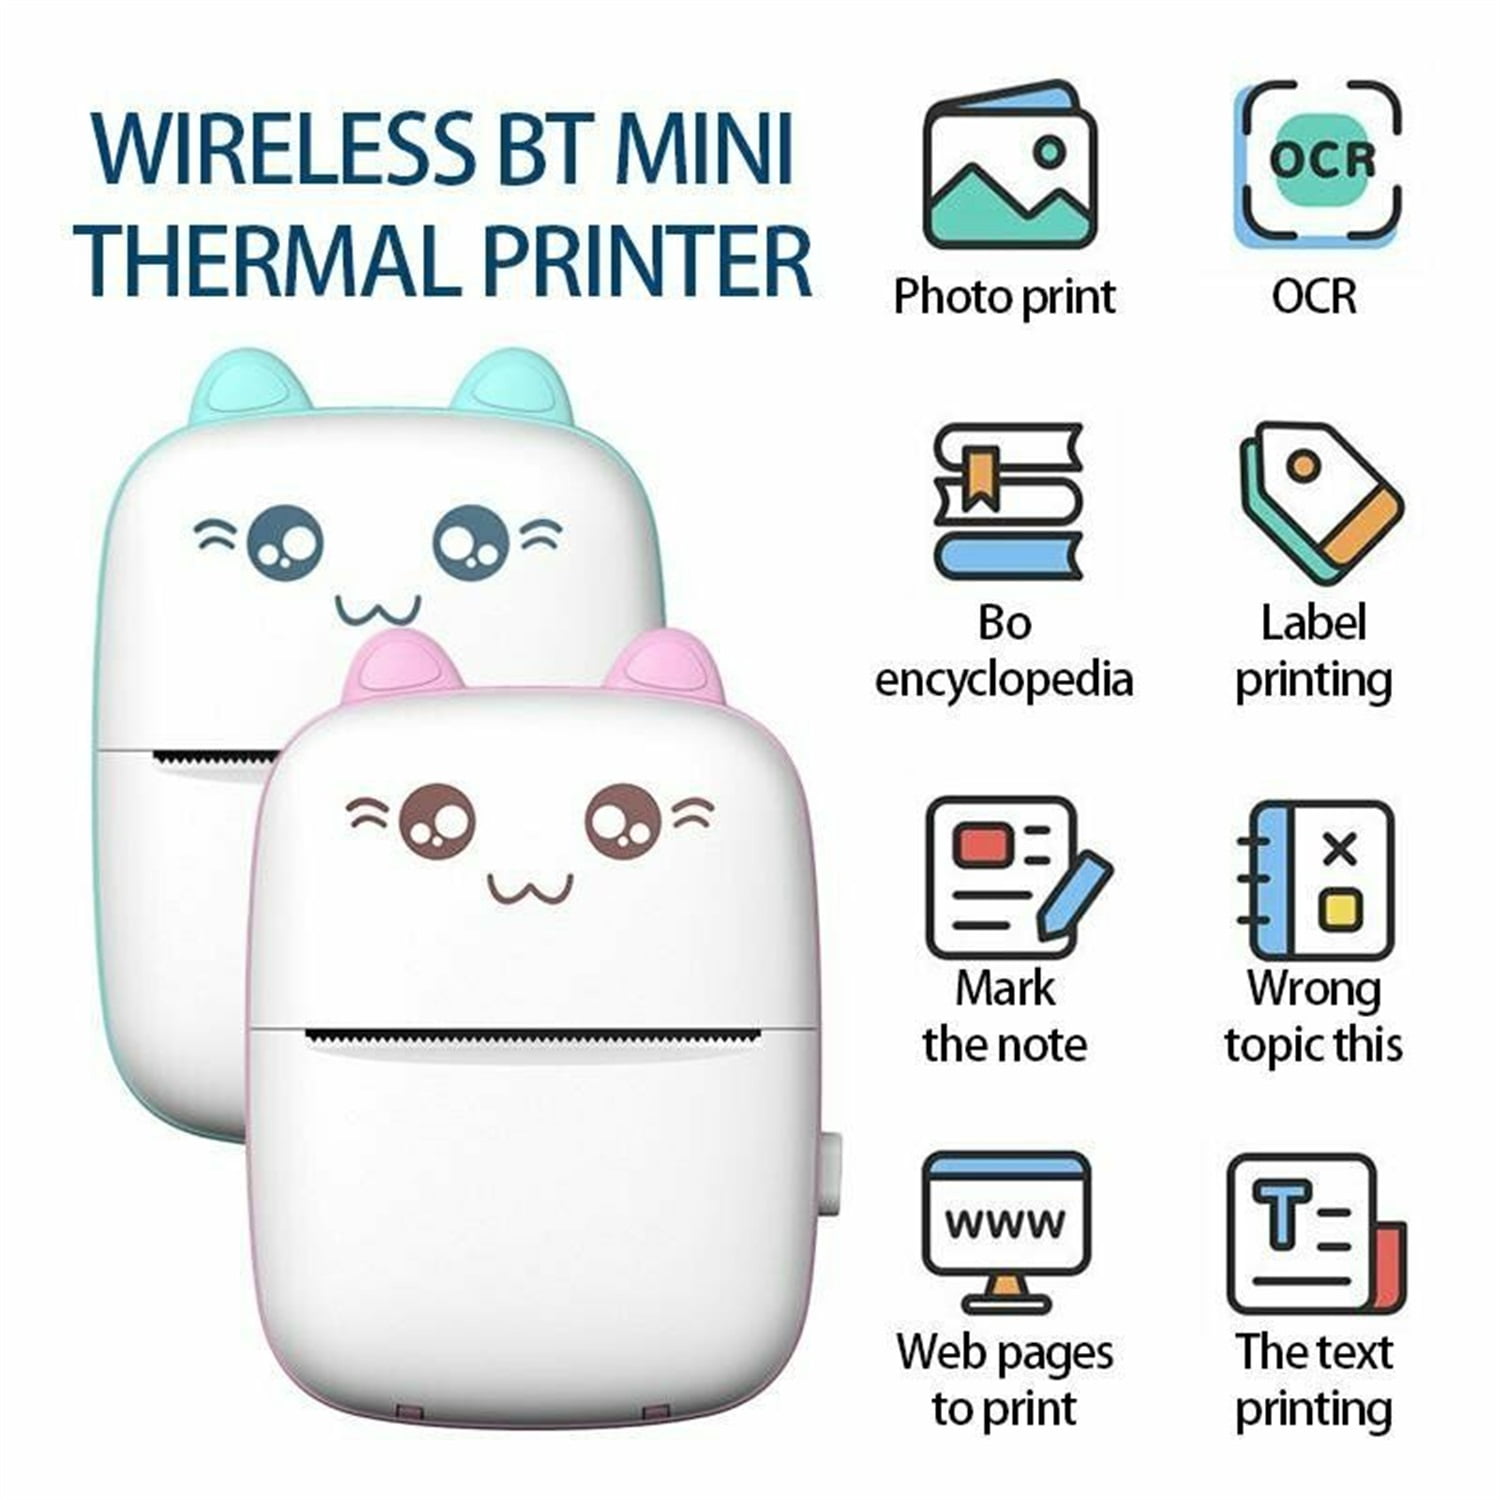 with Paper for Picture Memo Receipt Photo Printer Printing Learning Materials Pocket Thermal Printer Mini Portable Photo Printer 